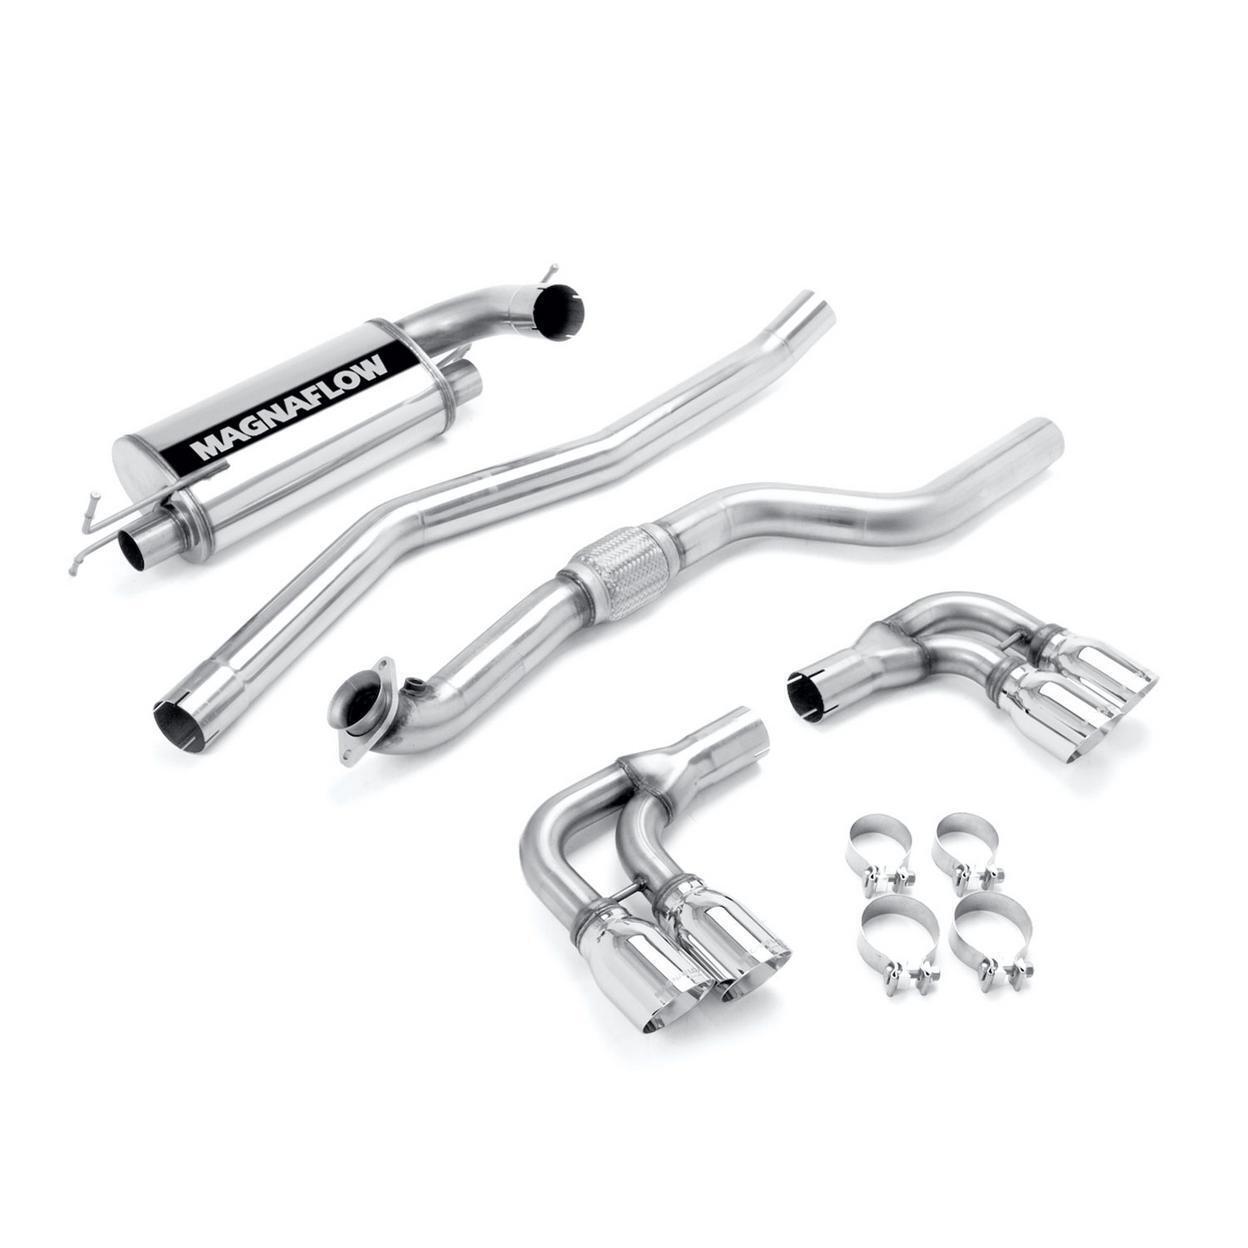 MagnaFlow Exhaust System Kit - Fits: 2007-2009 Saturn Sky Street Series Stainles